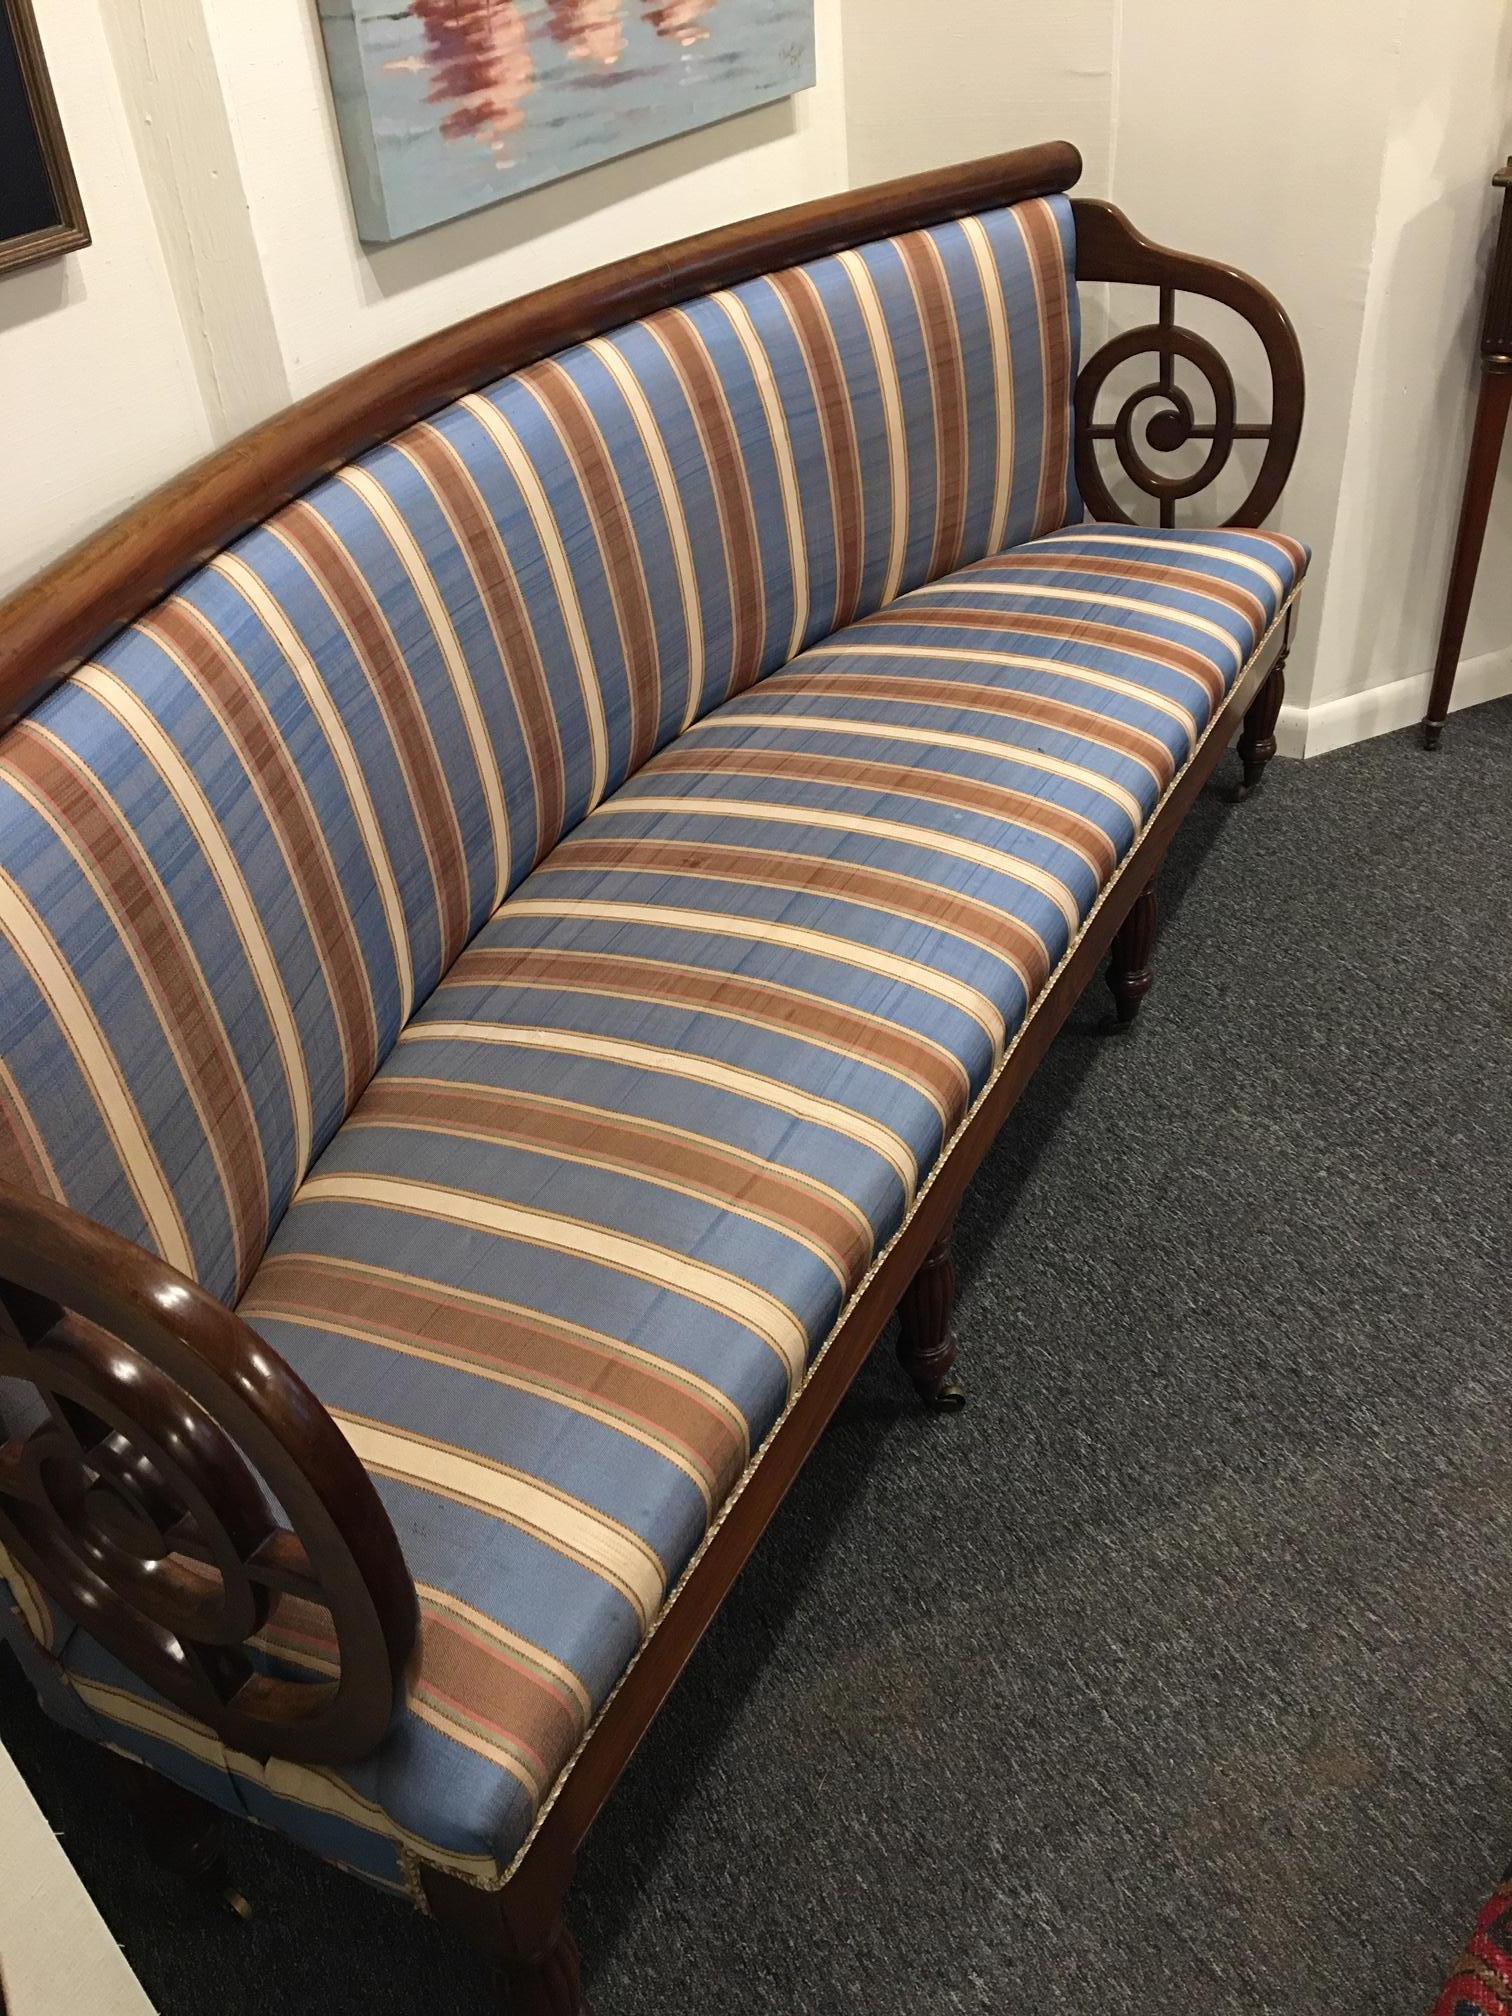 Upholstered Charles X Mahogany Sofa on Casters, 19th Century For Sale 5